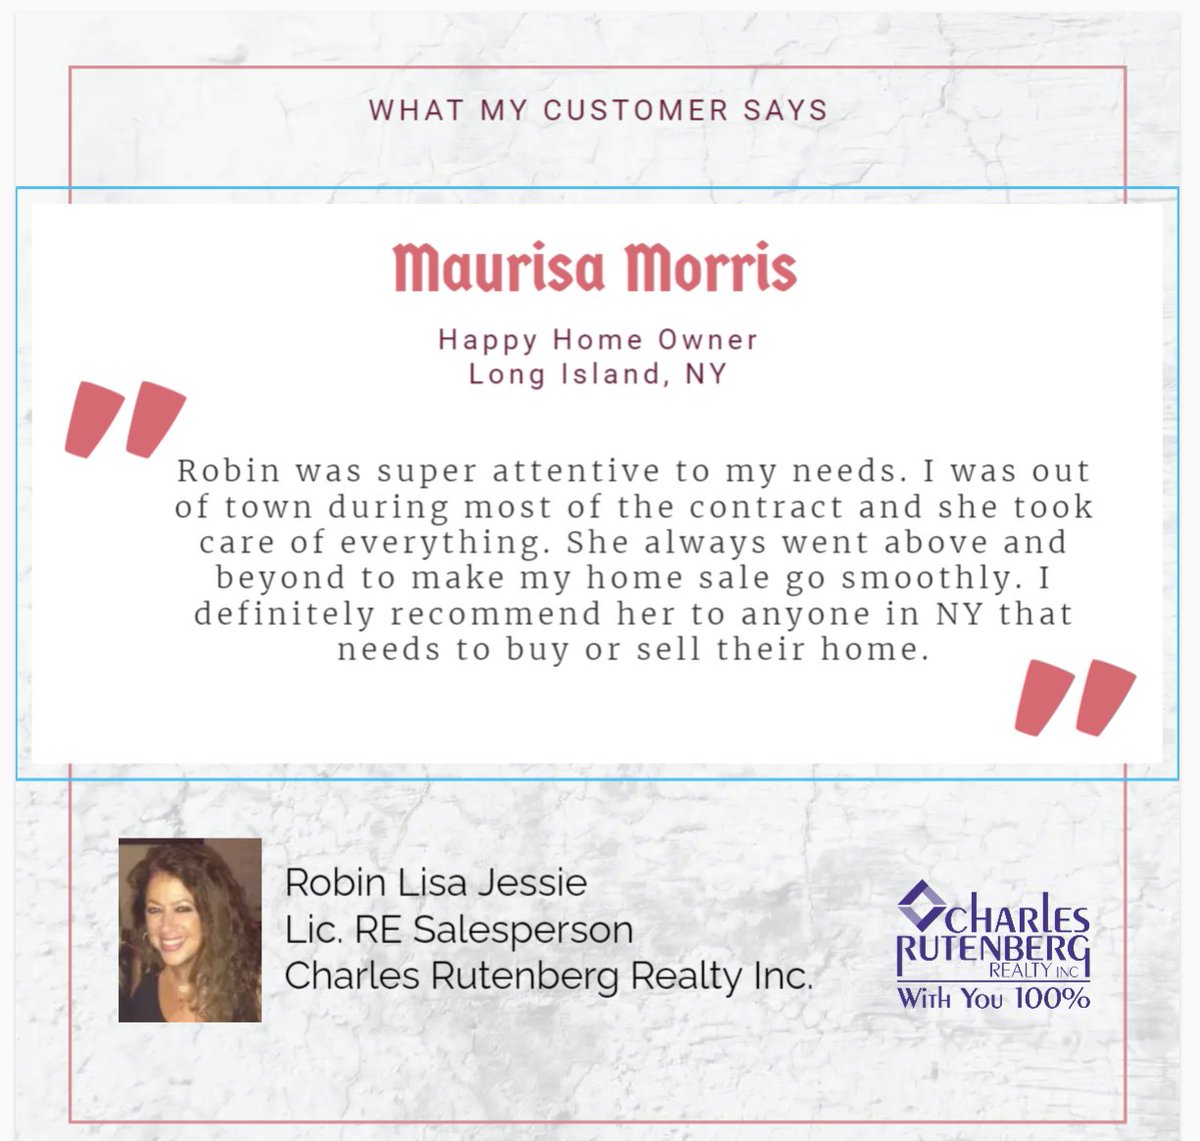 I love my clients!  Thank you Maurisa for your gracious review!

#testimonial #5starreview #lovemyclients #realestatereviews #livingonlongisland #lovewhatyoudo